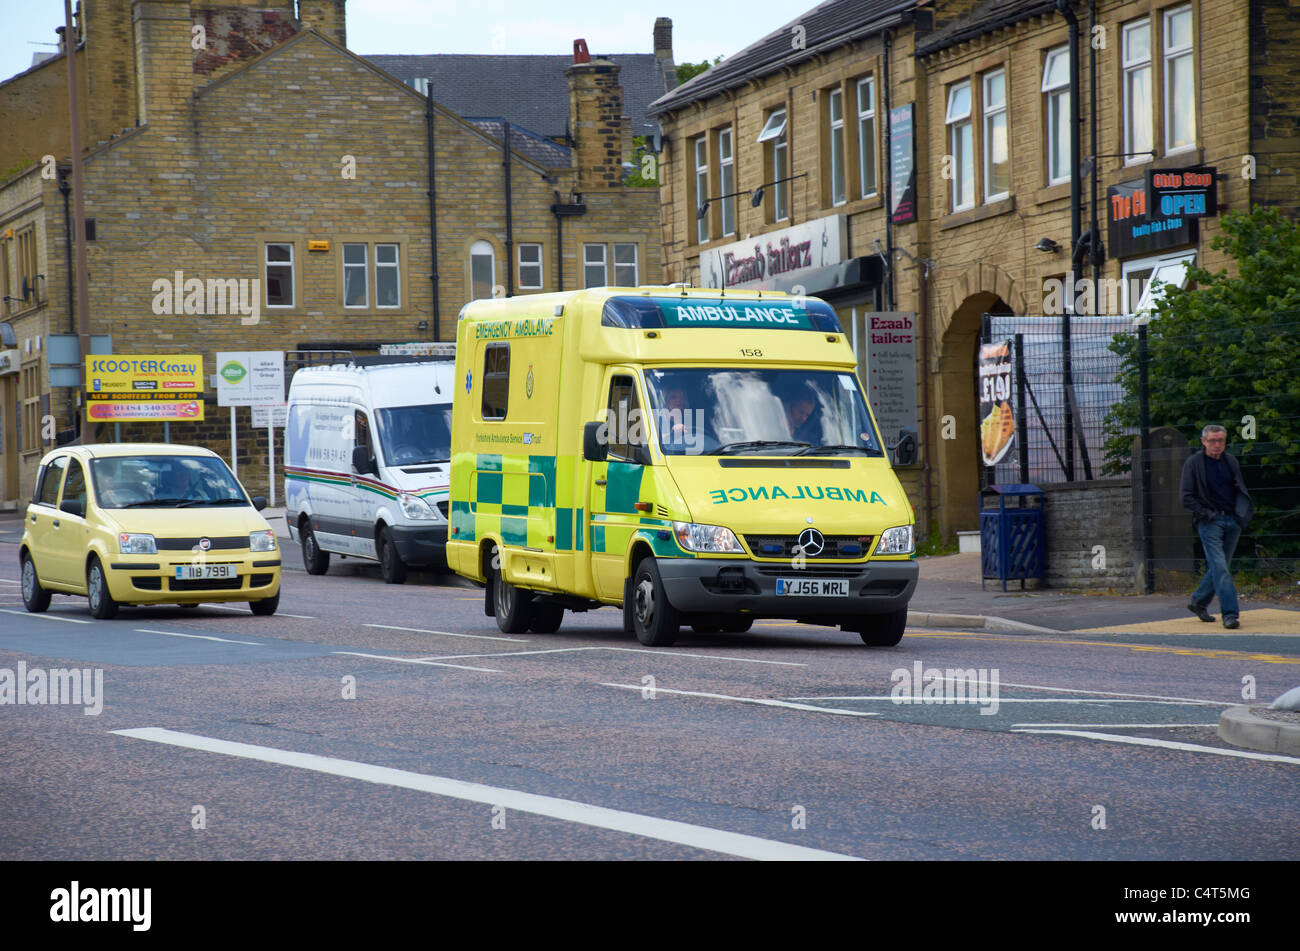 Ambulance attending an emergency in Huddersfield, West Yorkshire. Stock Photo